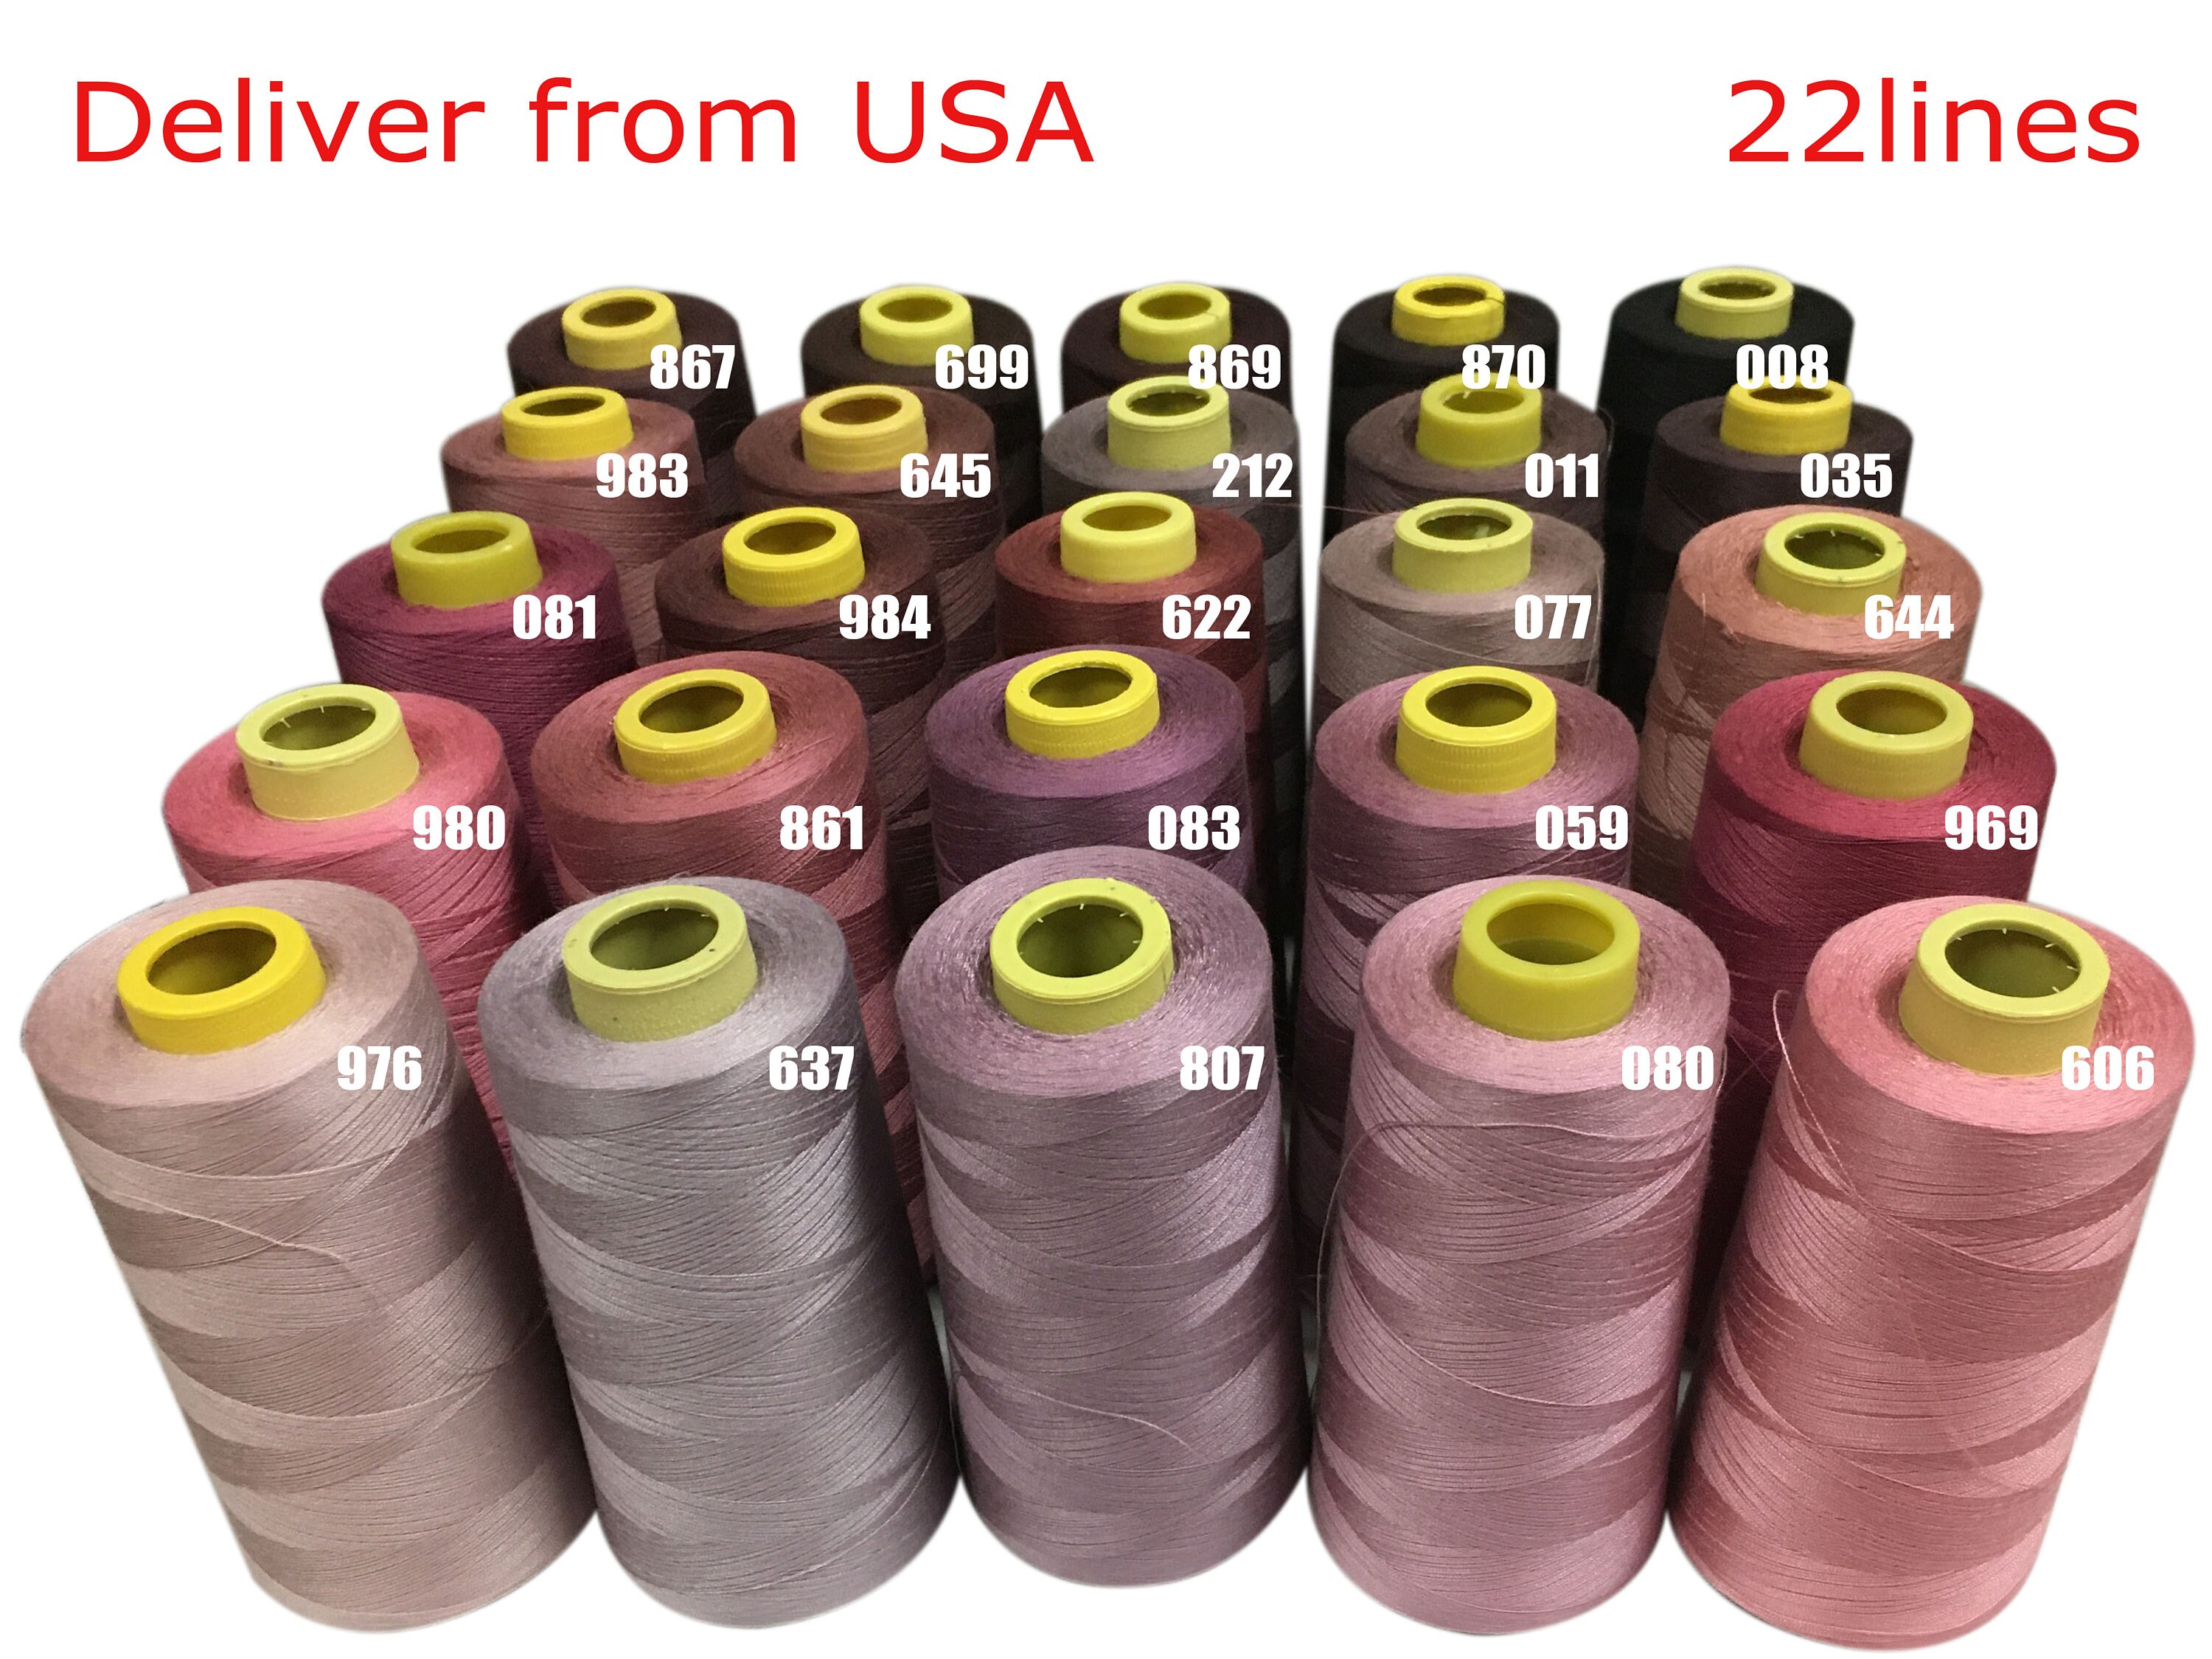  AK Trading 4-Pack Orange All Purpose Sewing Thread Cones (6000  Yards Each) of High Tensile Polyester Thread Spools for Sewing, Quilting,  Serger Machines, Overlock, Merrow & Hand Embroidery.